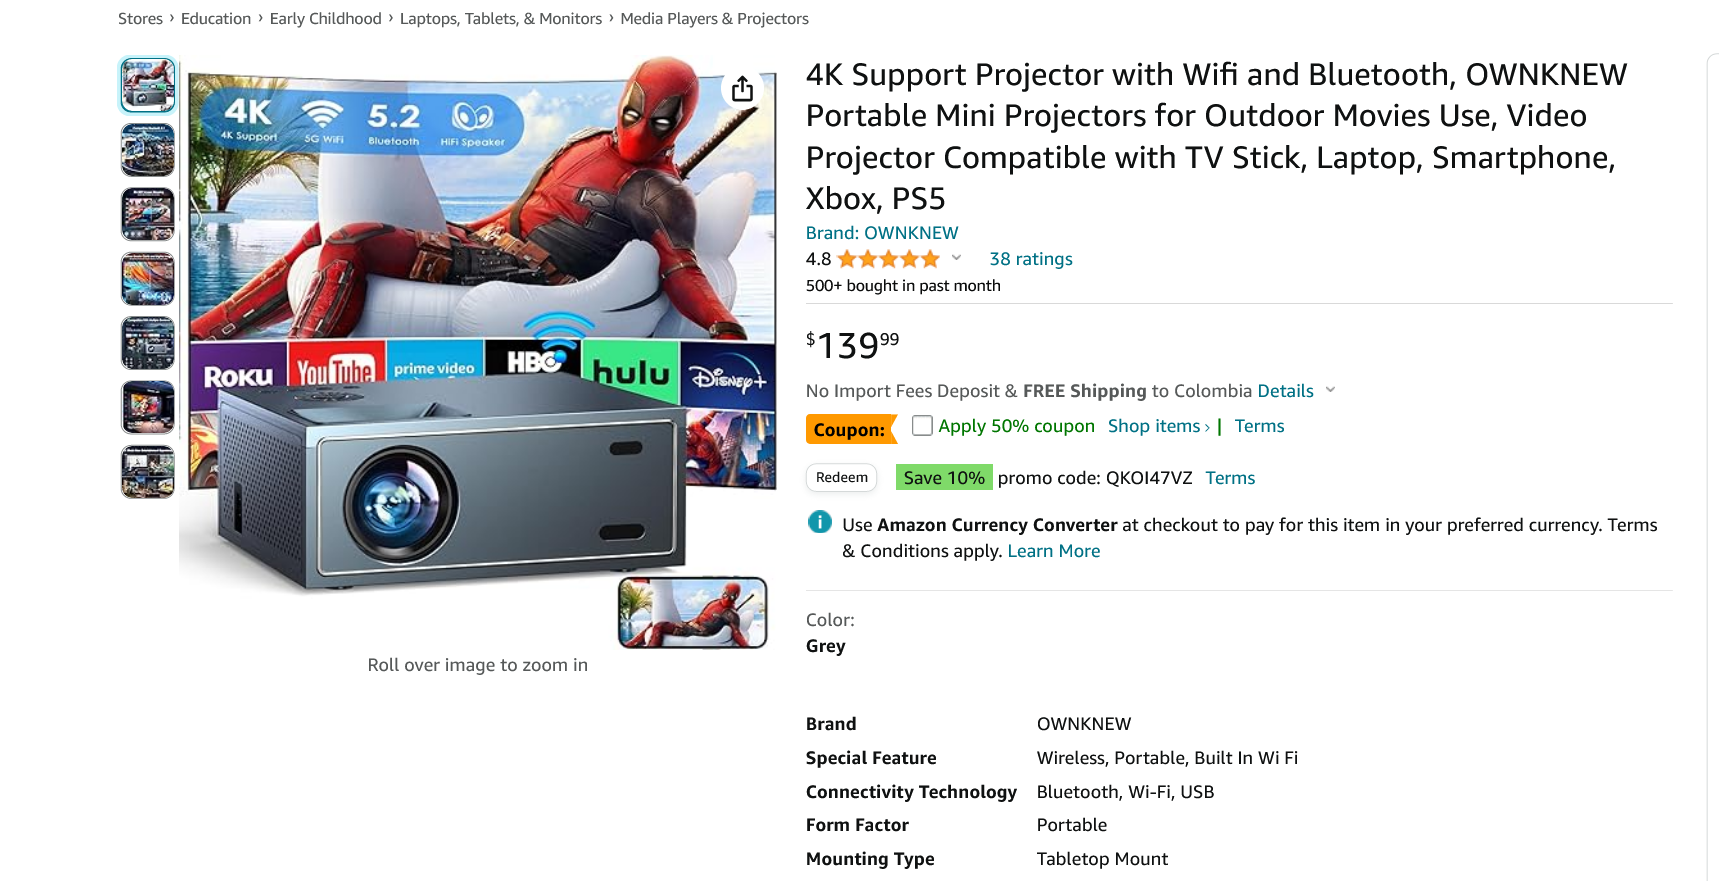 Screenshot 2023-11-14 at 14-48-49 Amazon.com 4K Support Projector with Wifi and Bluetooth OWNK...png